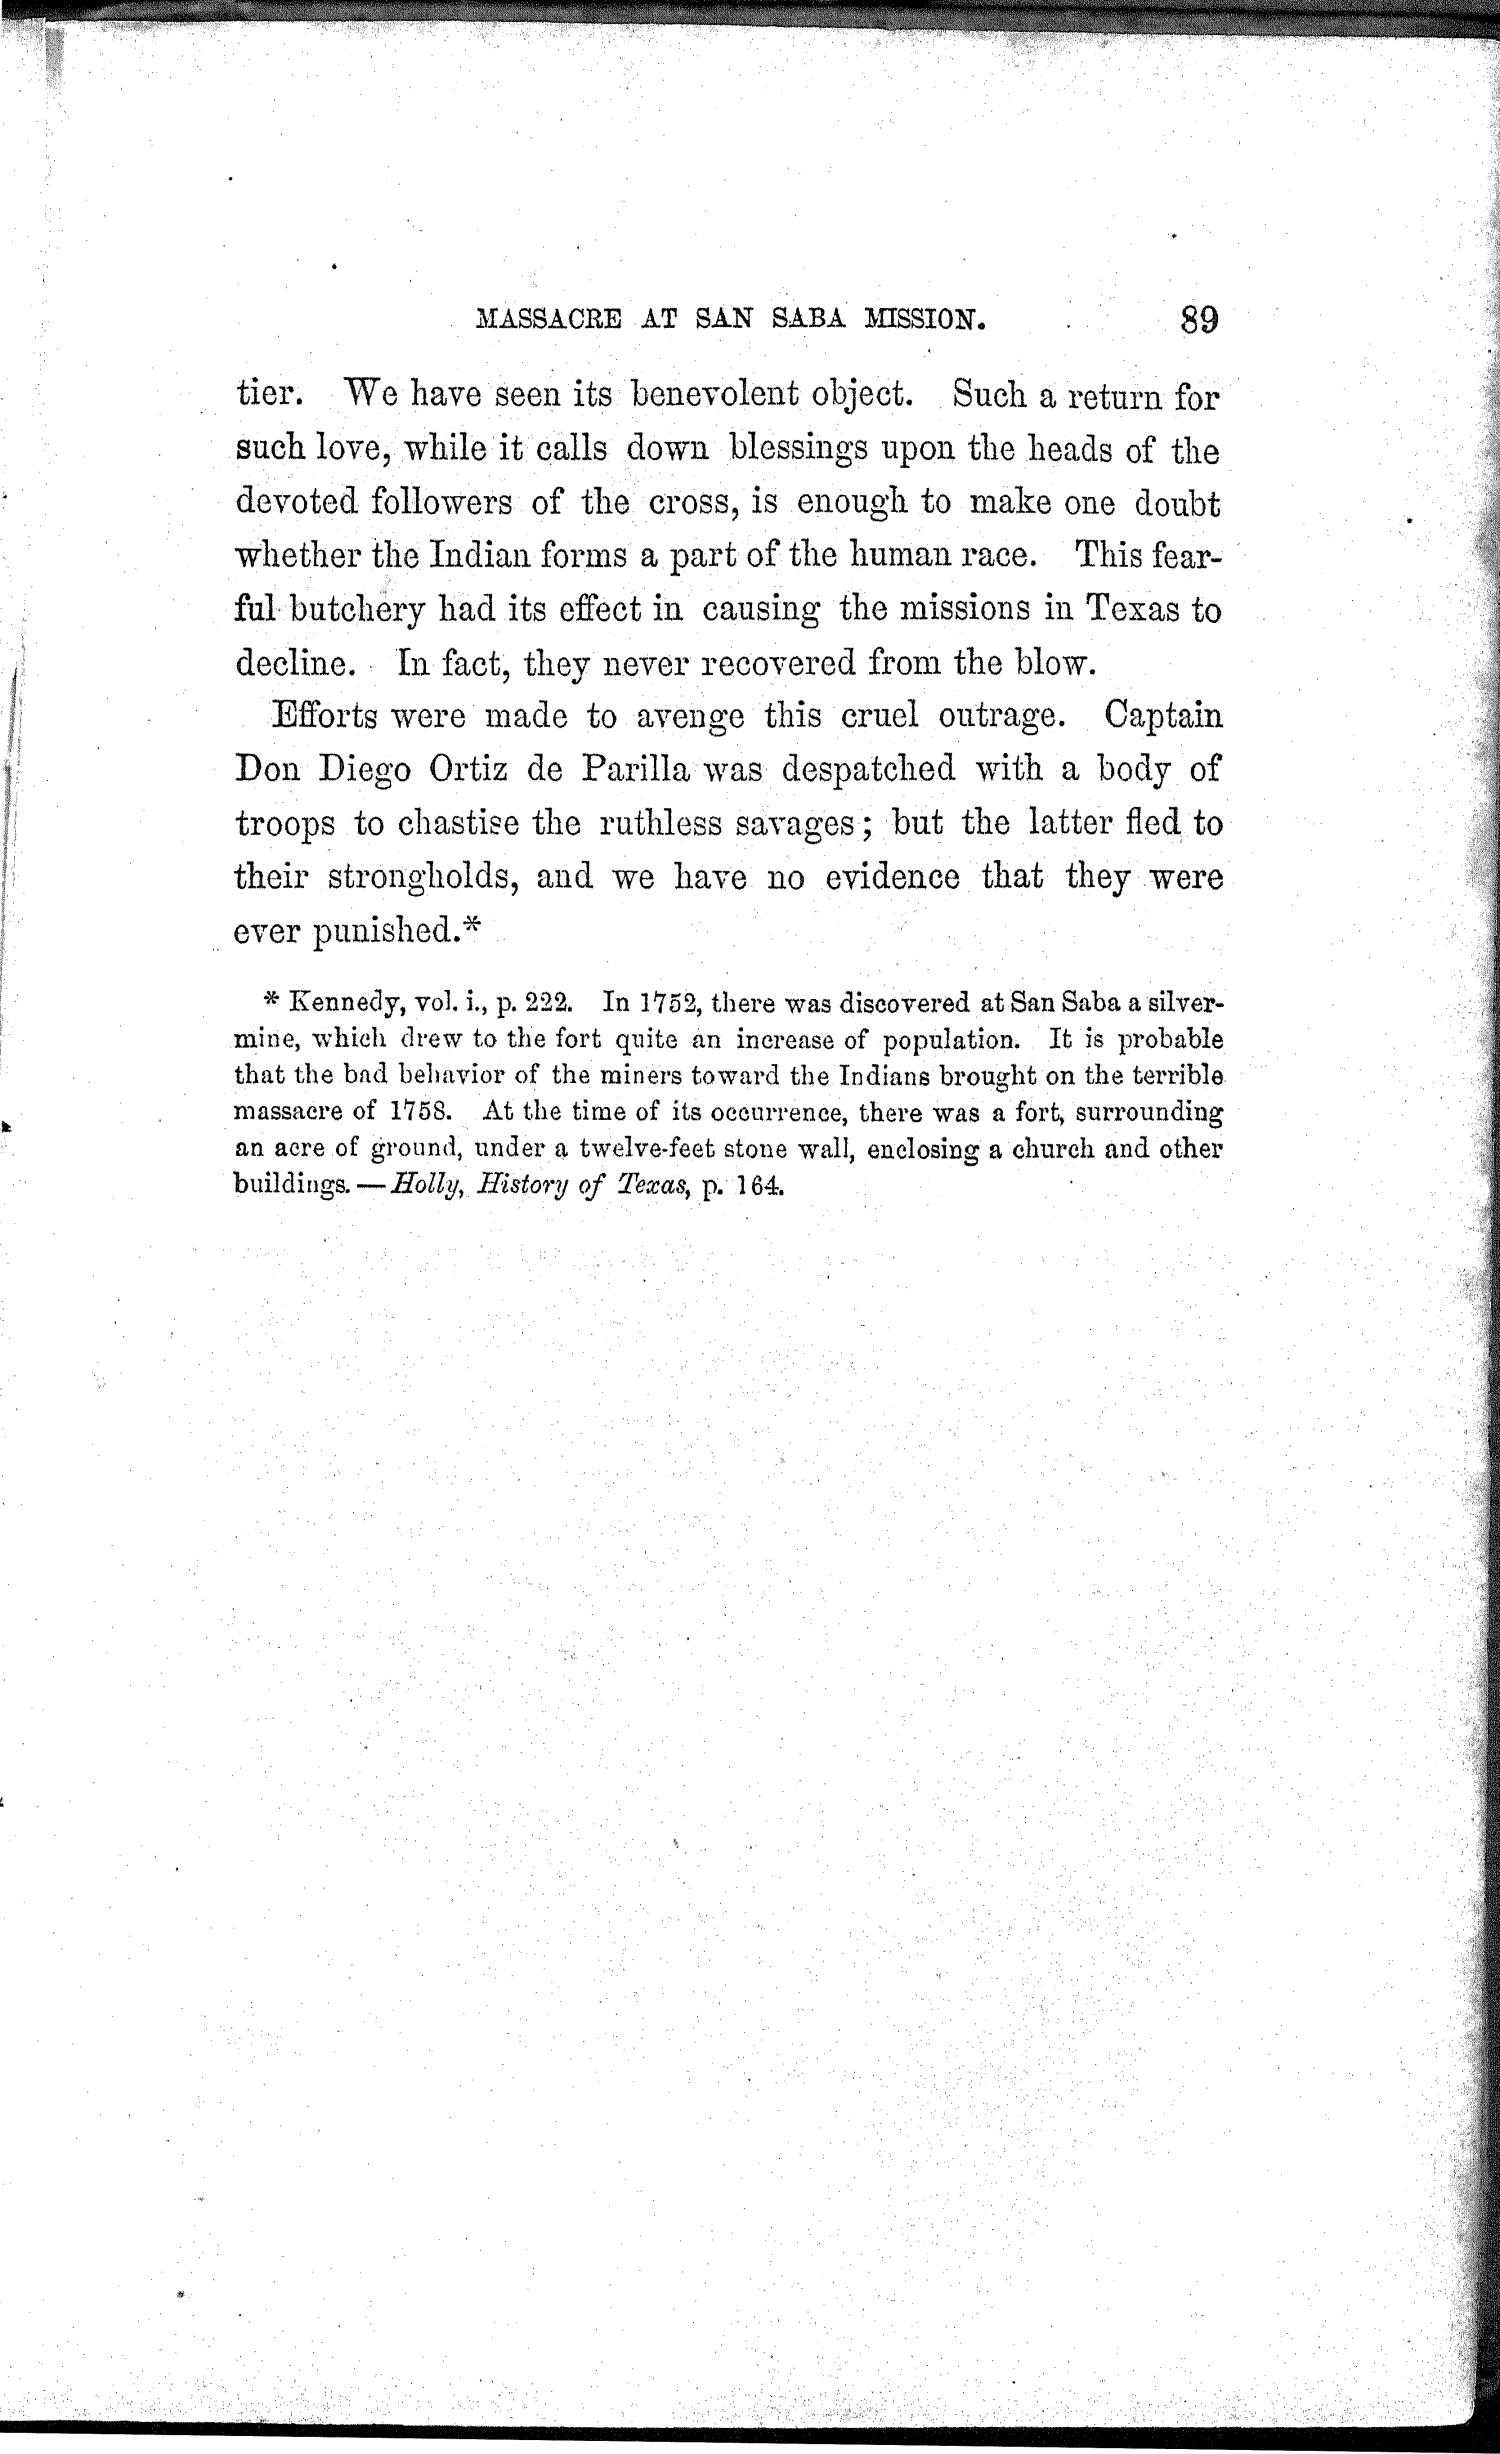 History of Texas: From Its First Settlement in 1685 to Its Annexation to the United States in 1846, Volume 1
                                                
                                                    89
                                                